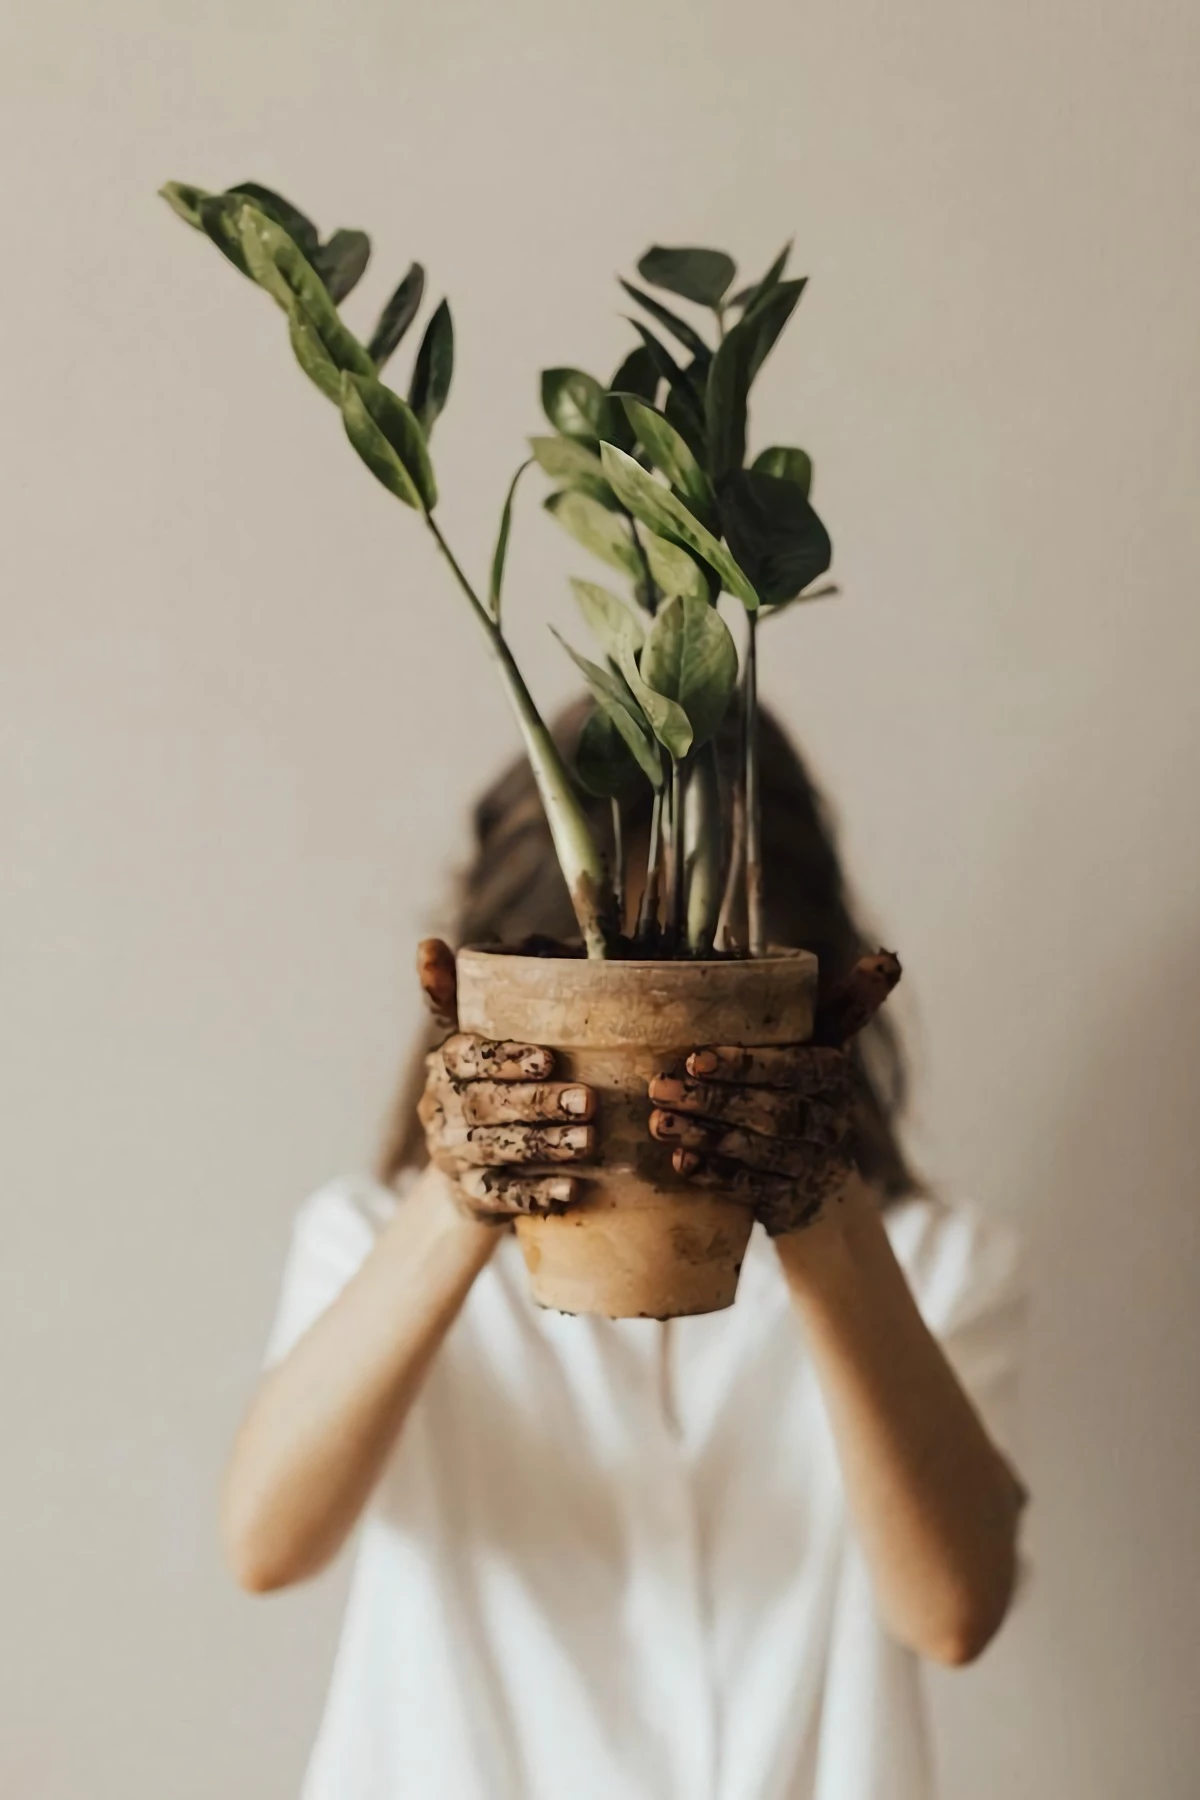 woman holding a plant with dirty hands